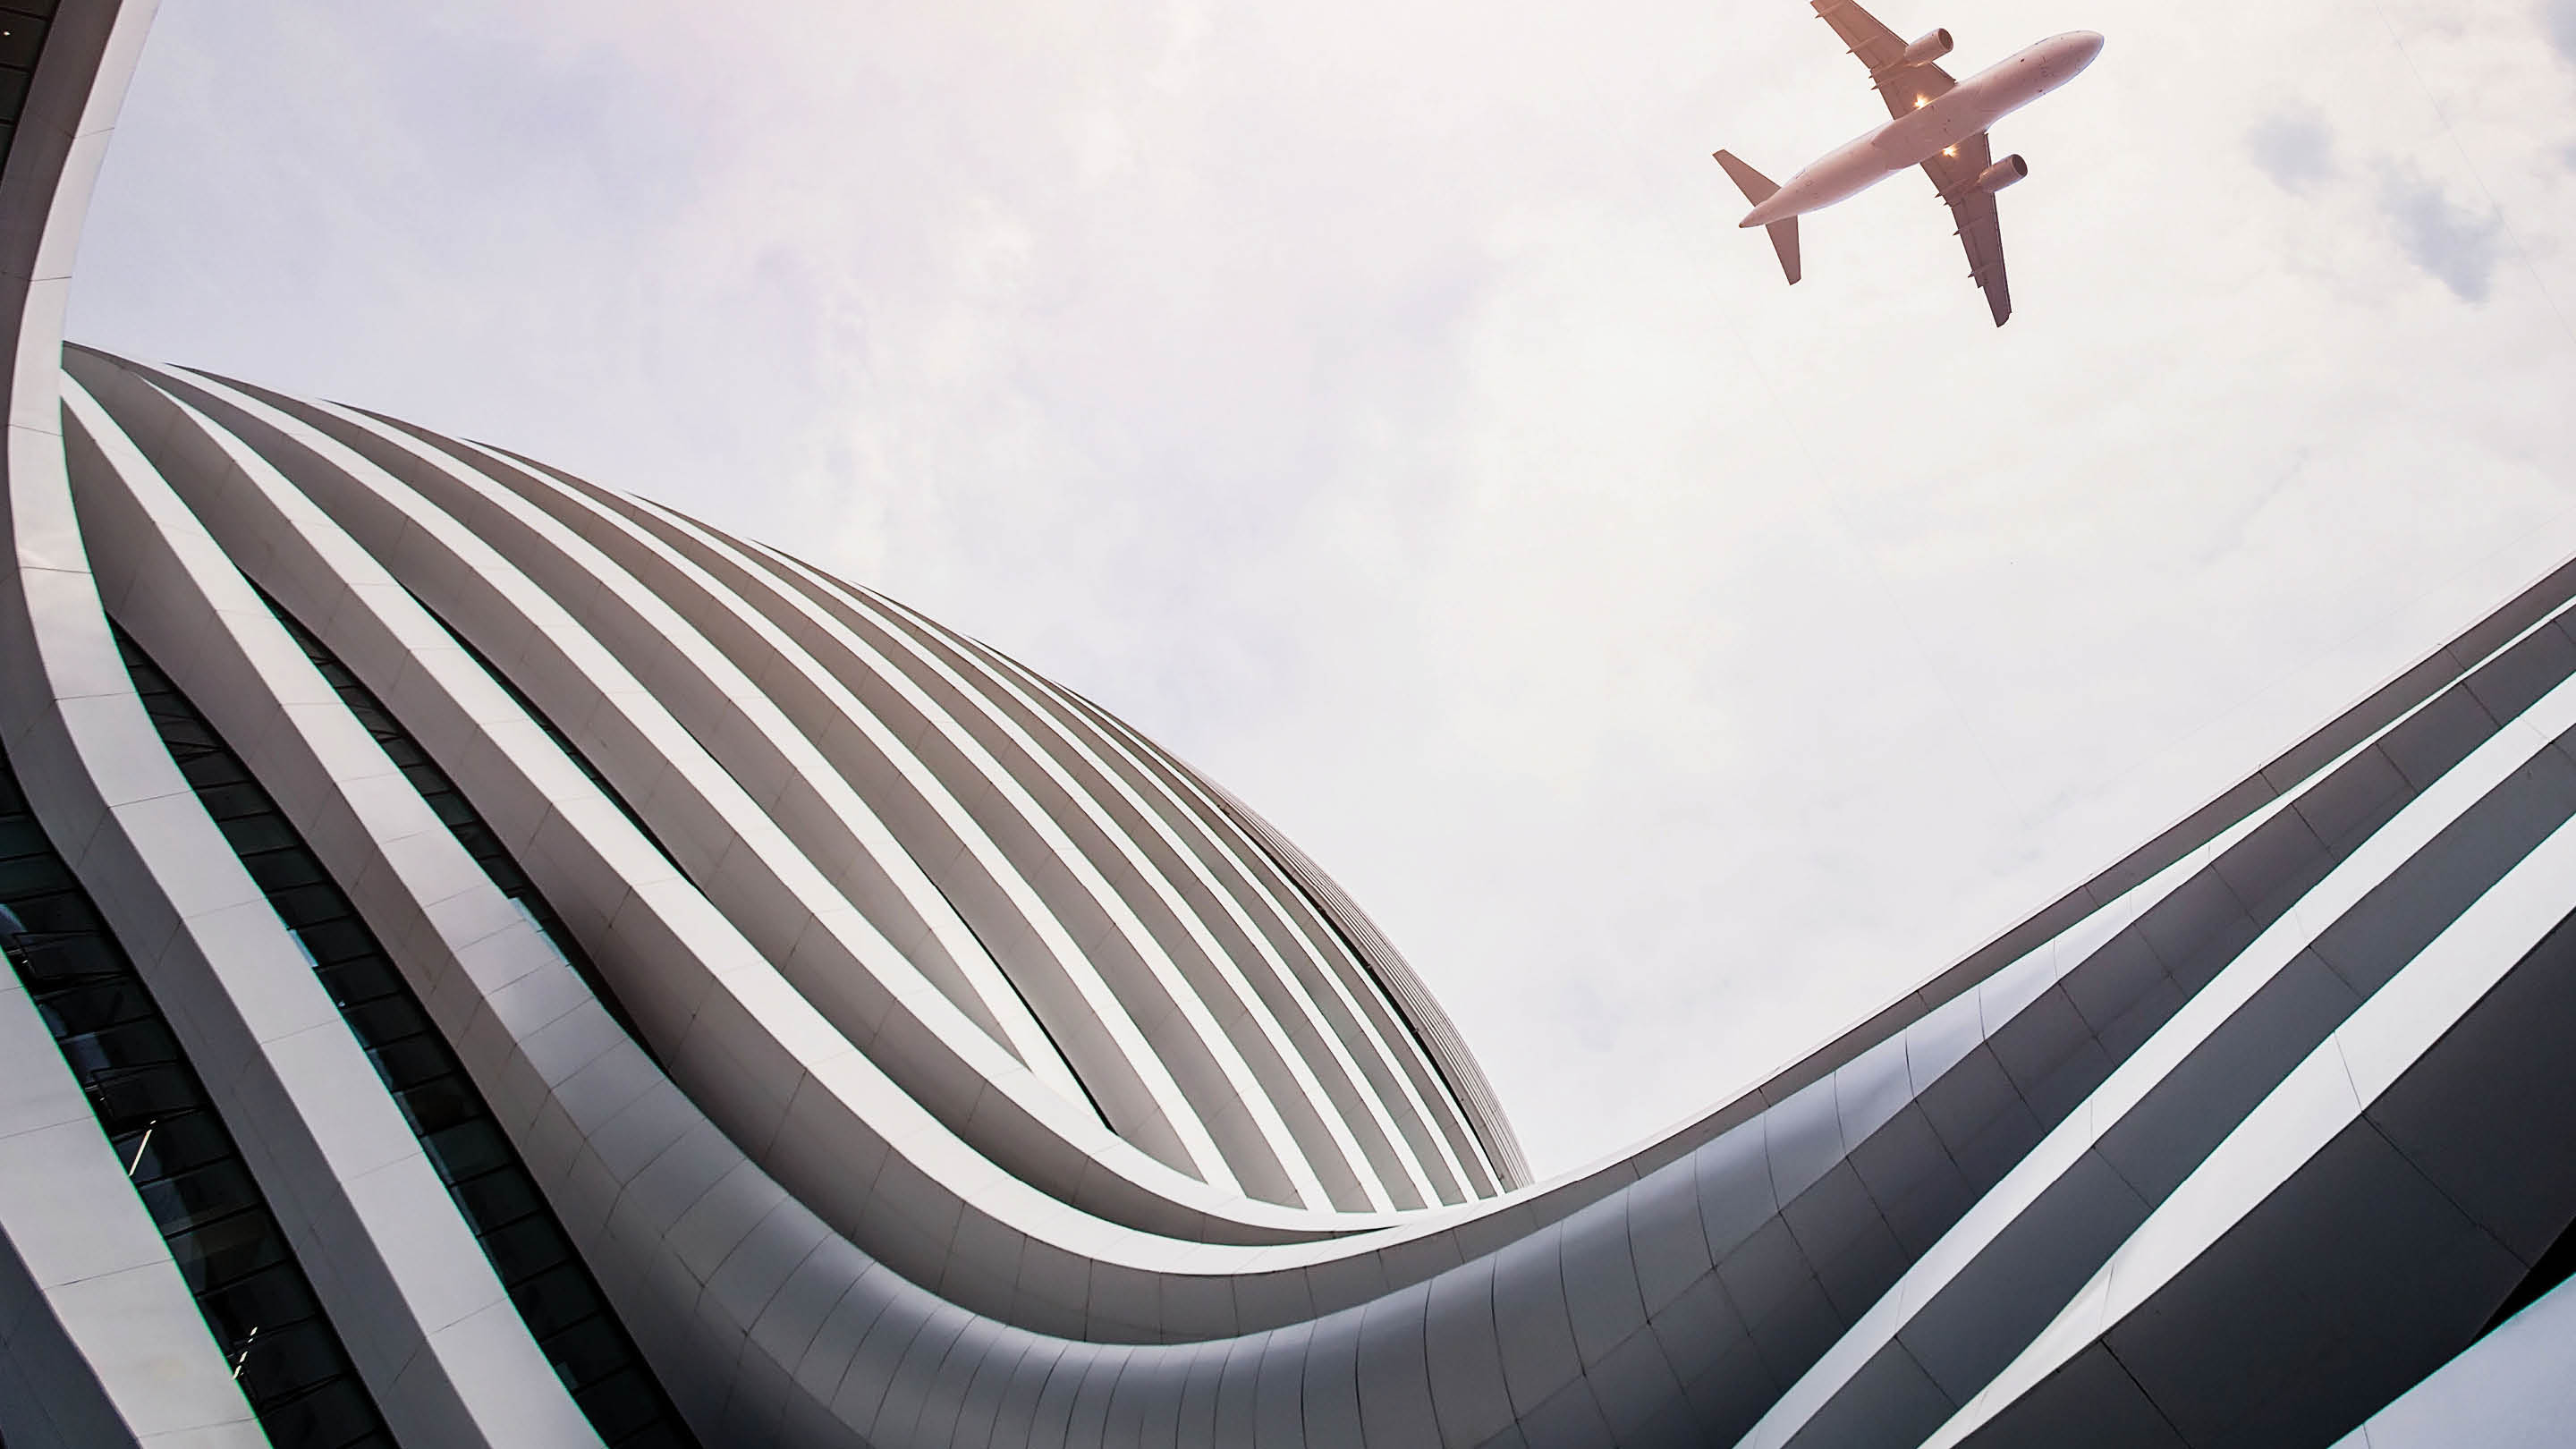 Photograph of an airplane soaring over a building.